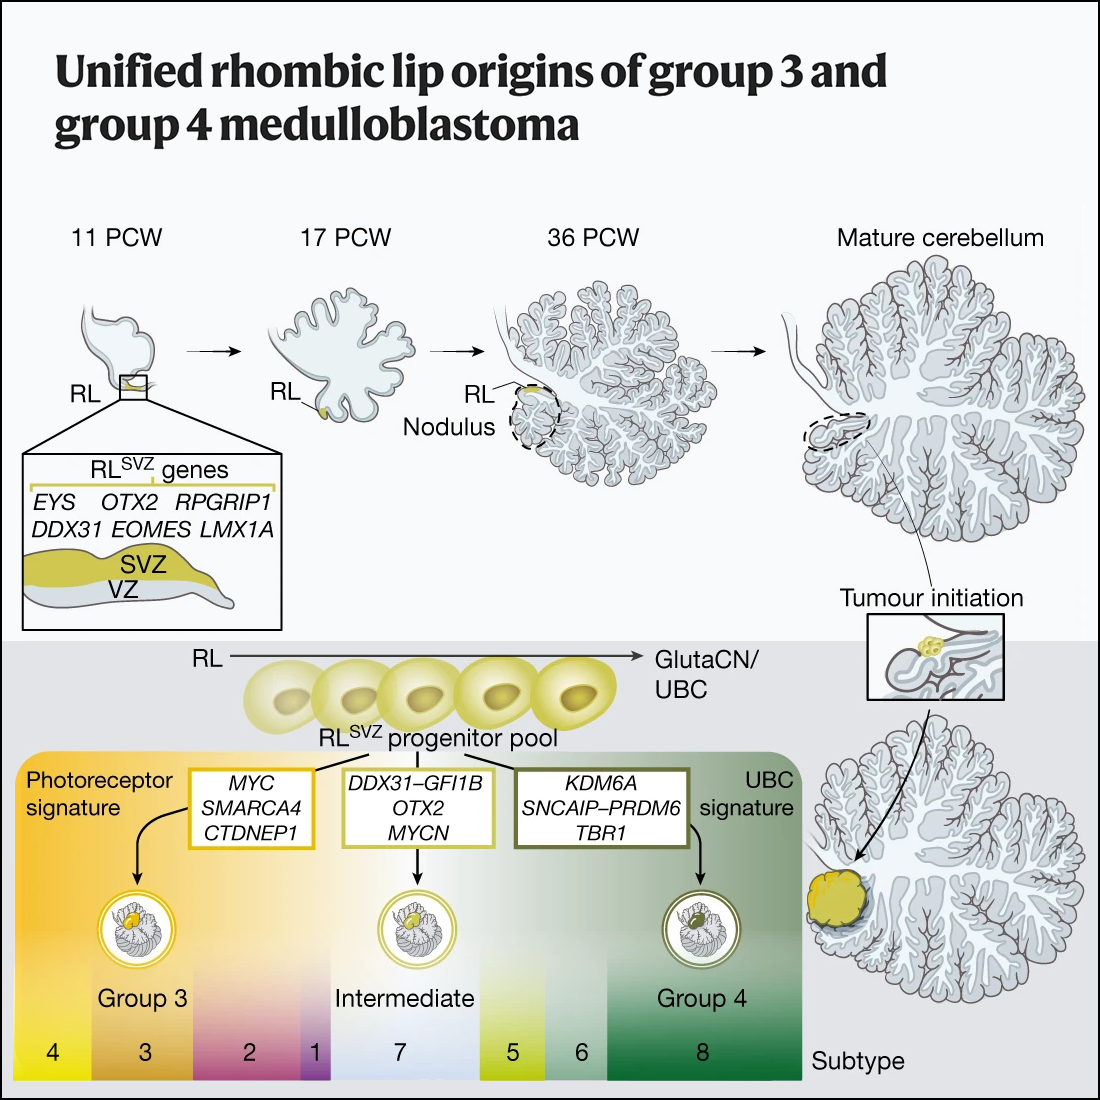 Unified rhombic lip origins of group 3 and group 4 medulloblastoma